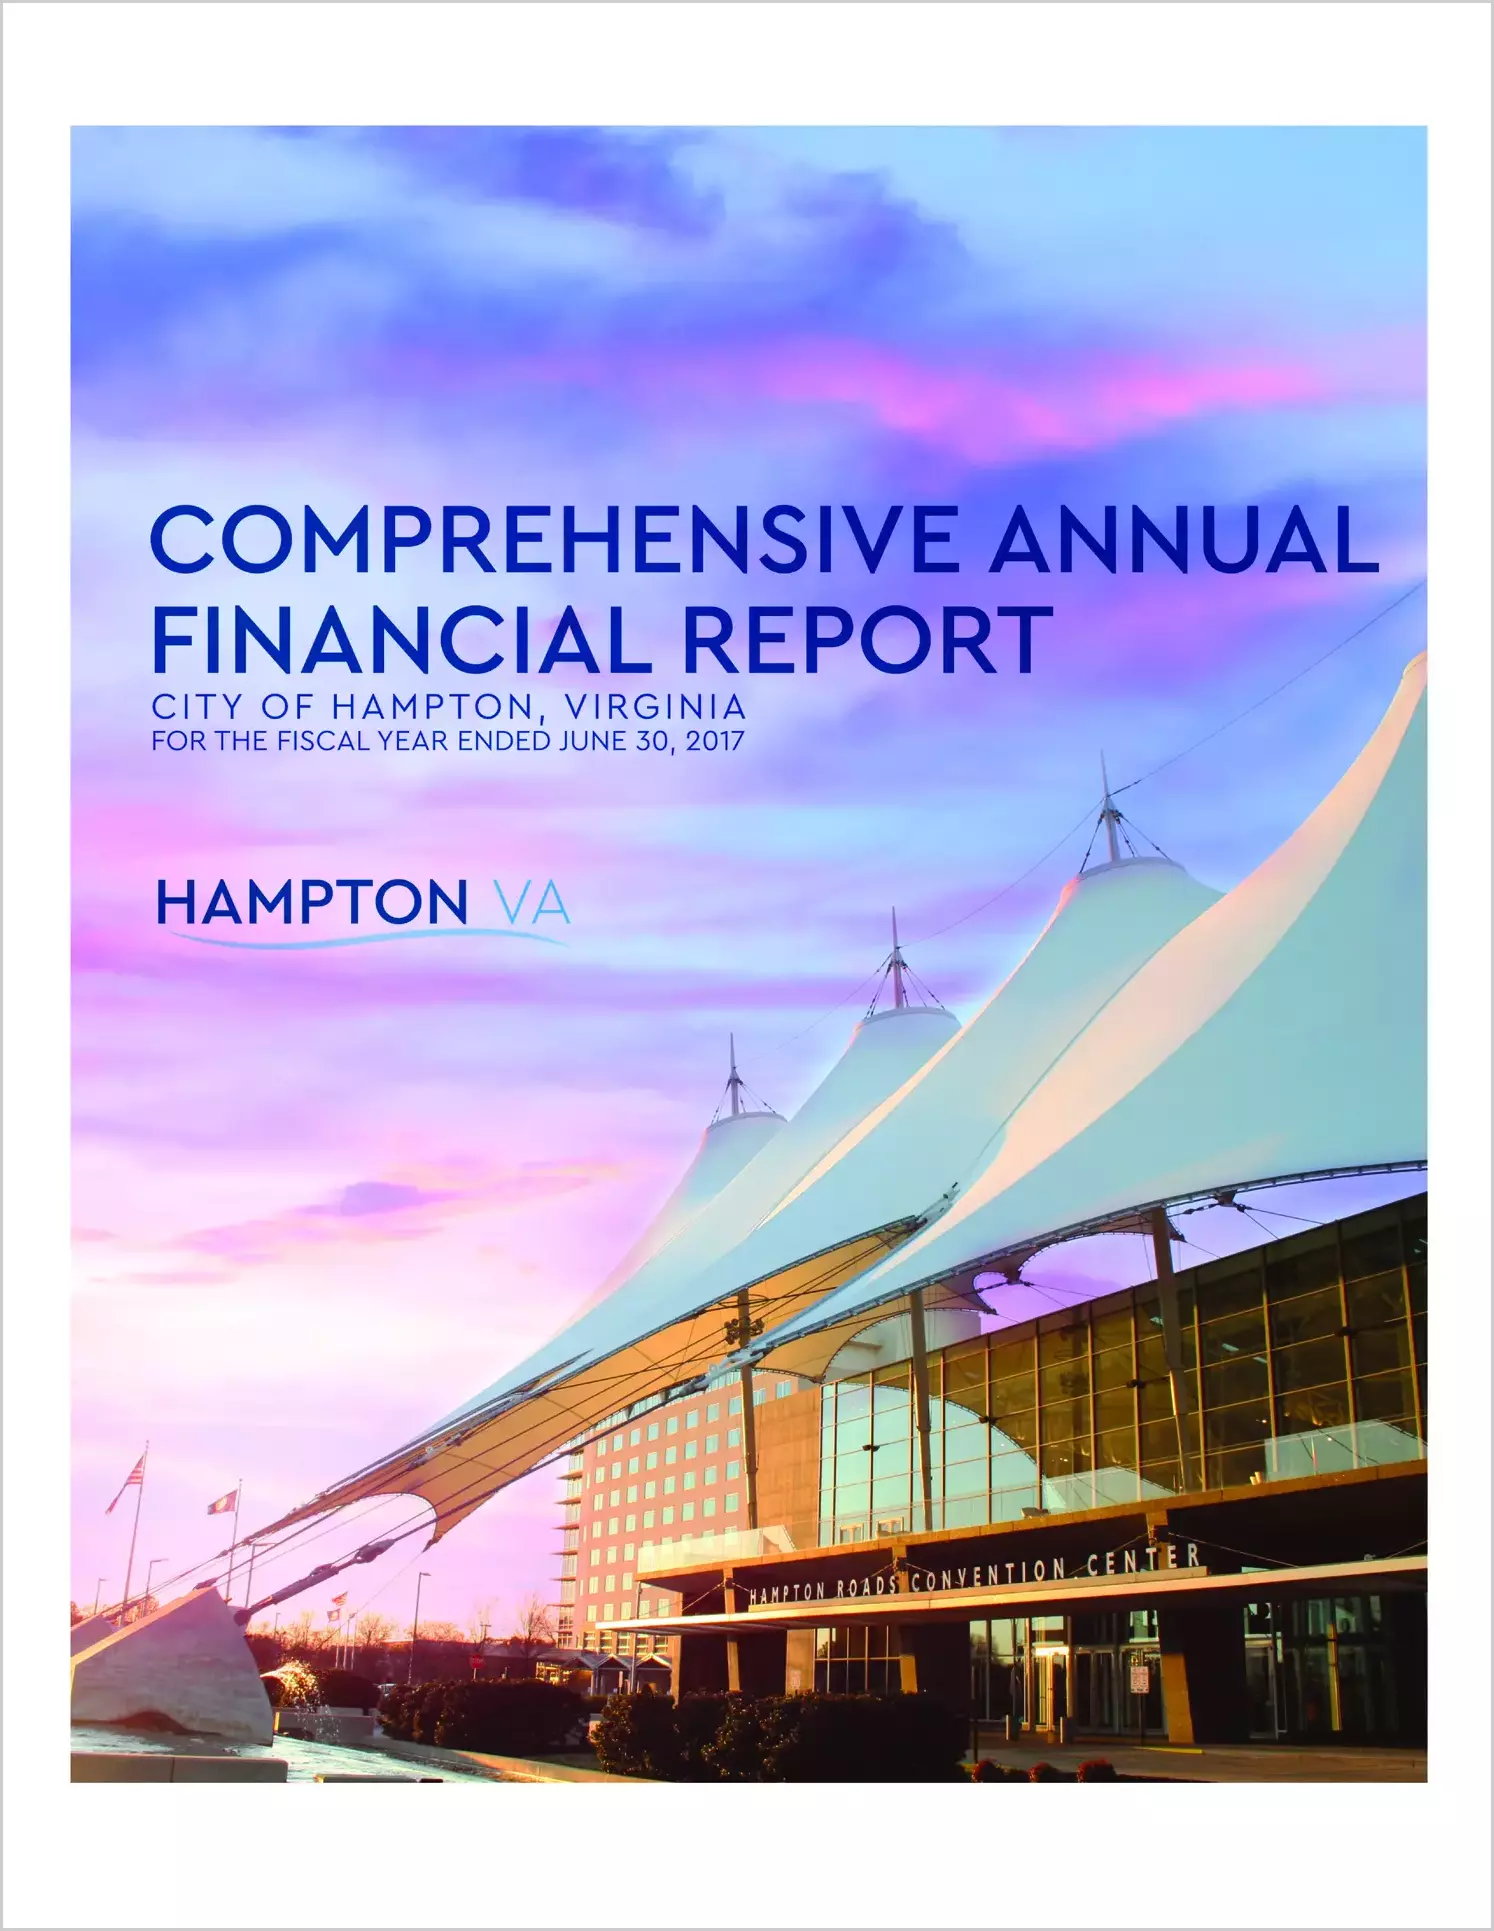 2017 Annual Financial Report for City of Hampton